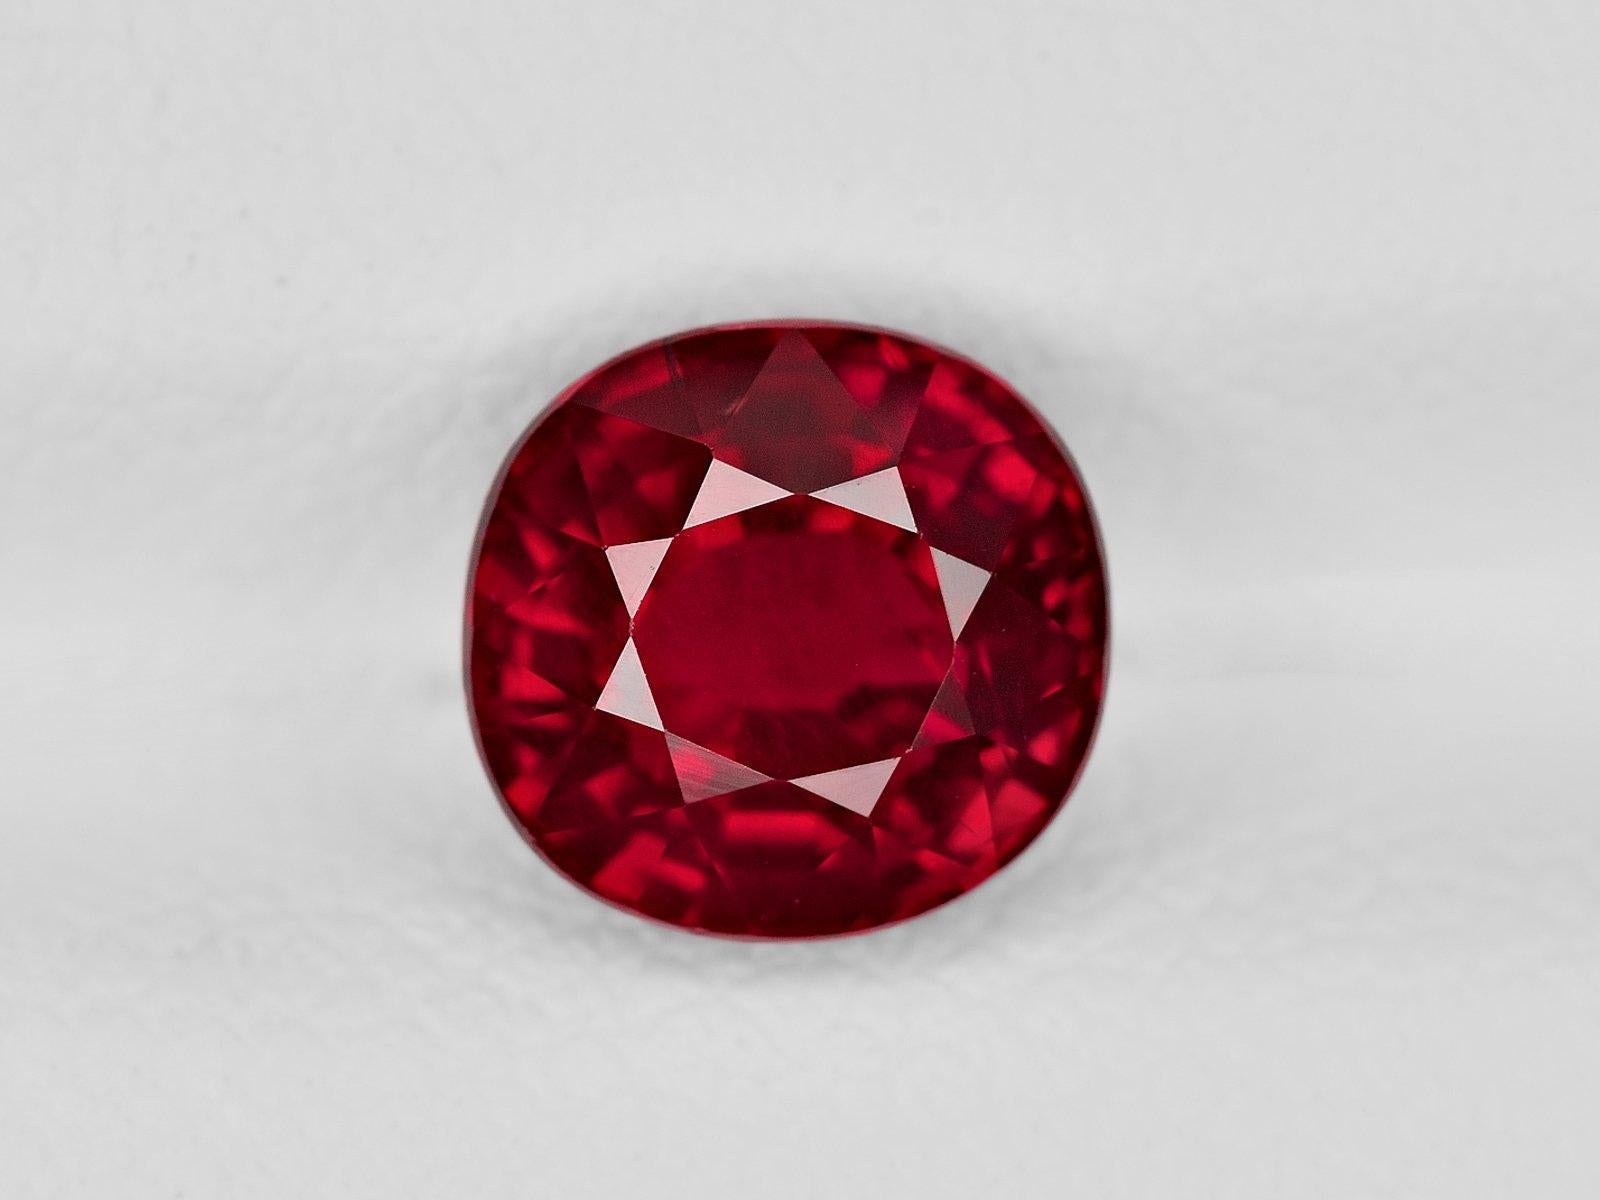 Prepare to be captivated by the sheer magnificence of this Natural Ruby, originating from the legendary mines of Mogok in Burma (Myanmar).

Weighing an impressive 3.35 carats and fashioned into an elegant oval shape, this gemstone is a testament to